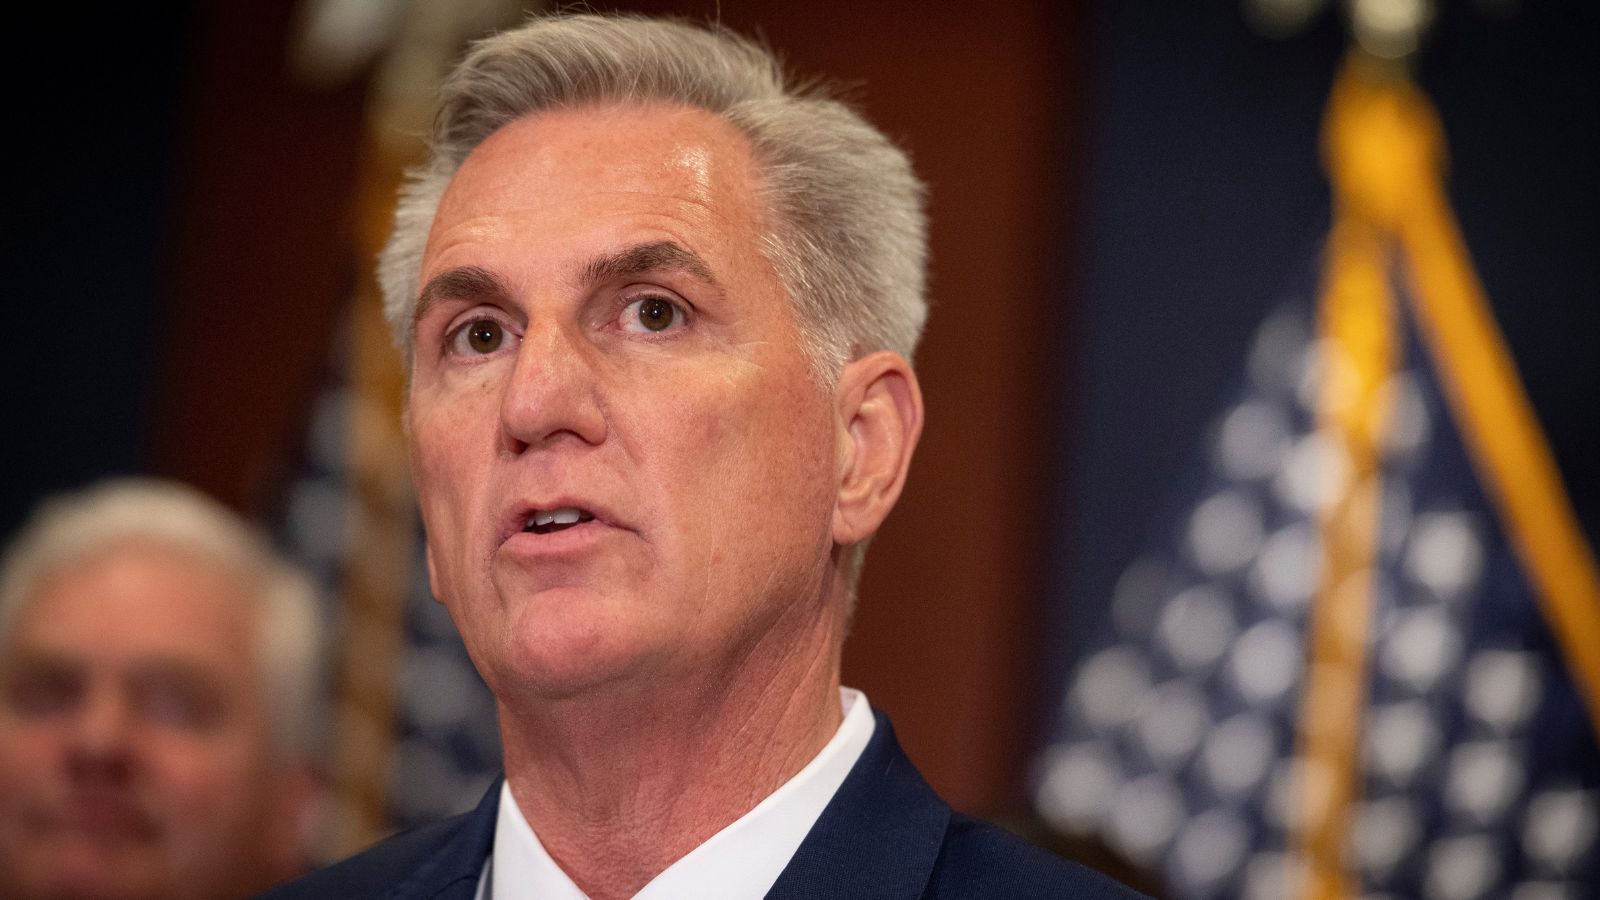 “We Are the Laughing Stock on the Global Stage”: GOP Turmoil Amid McCarthy’s Physical Confrontation